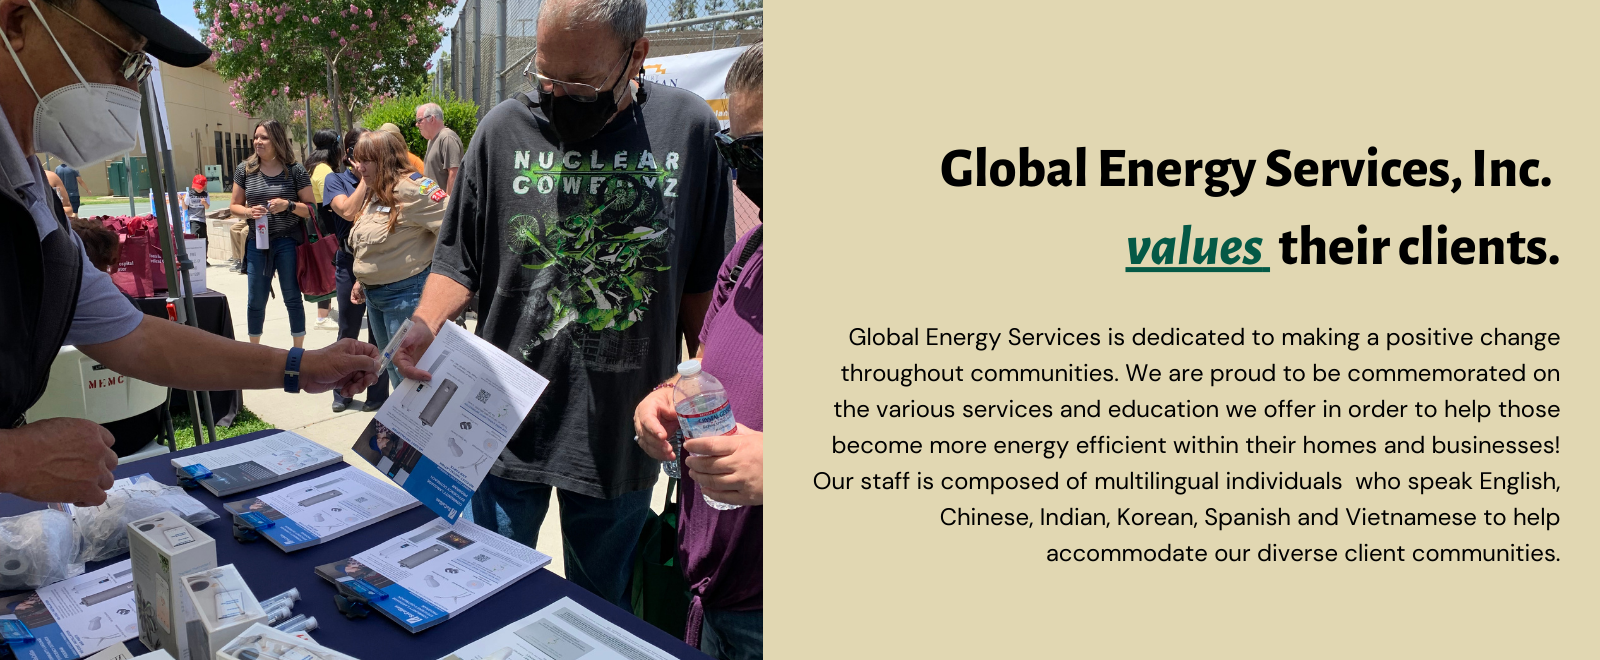 Global Energy Services, Inc. values their clients. Global Energy Services is dedicated to making a positive change throughout communities. We are proud to be commemorated on the various services and education we offer in order to help those become more energy efficient within their homes and businesses! Our staff is composed of multilingual individuals who speak English, Chinese, Indian, Korean, Spanish and Vietnamese to help accommodate our diverse client communities.